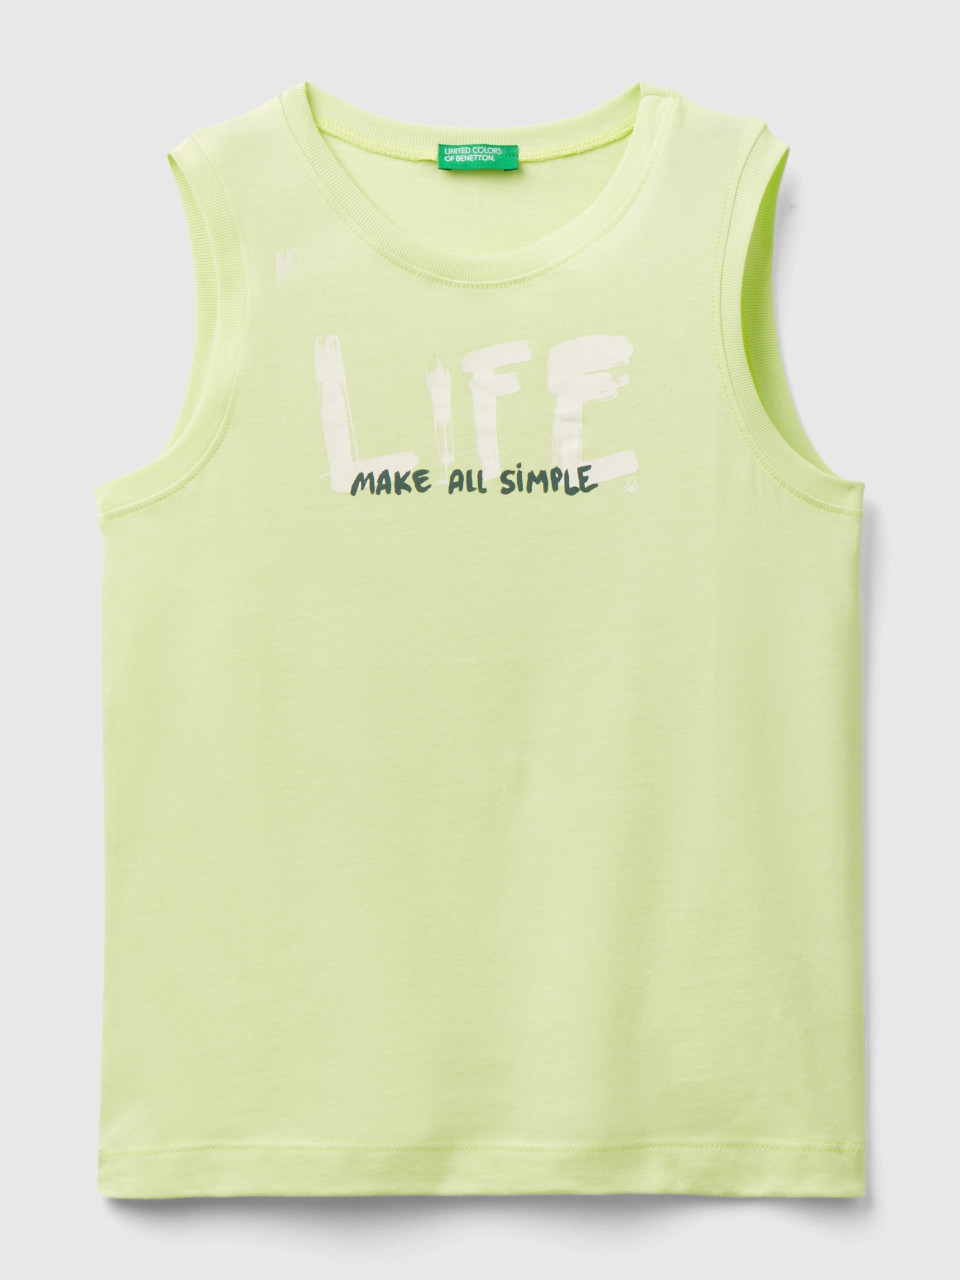 Benetton, Canotta Con Stampa Lettering, Lime, Bambini